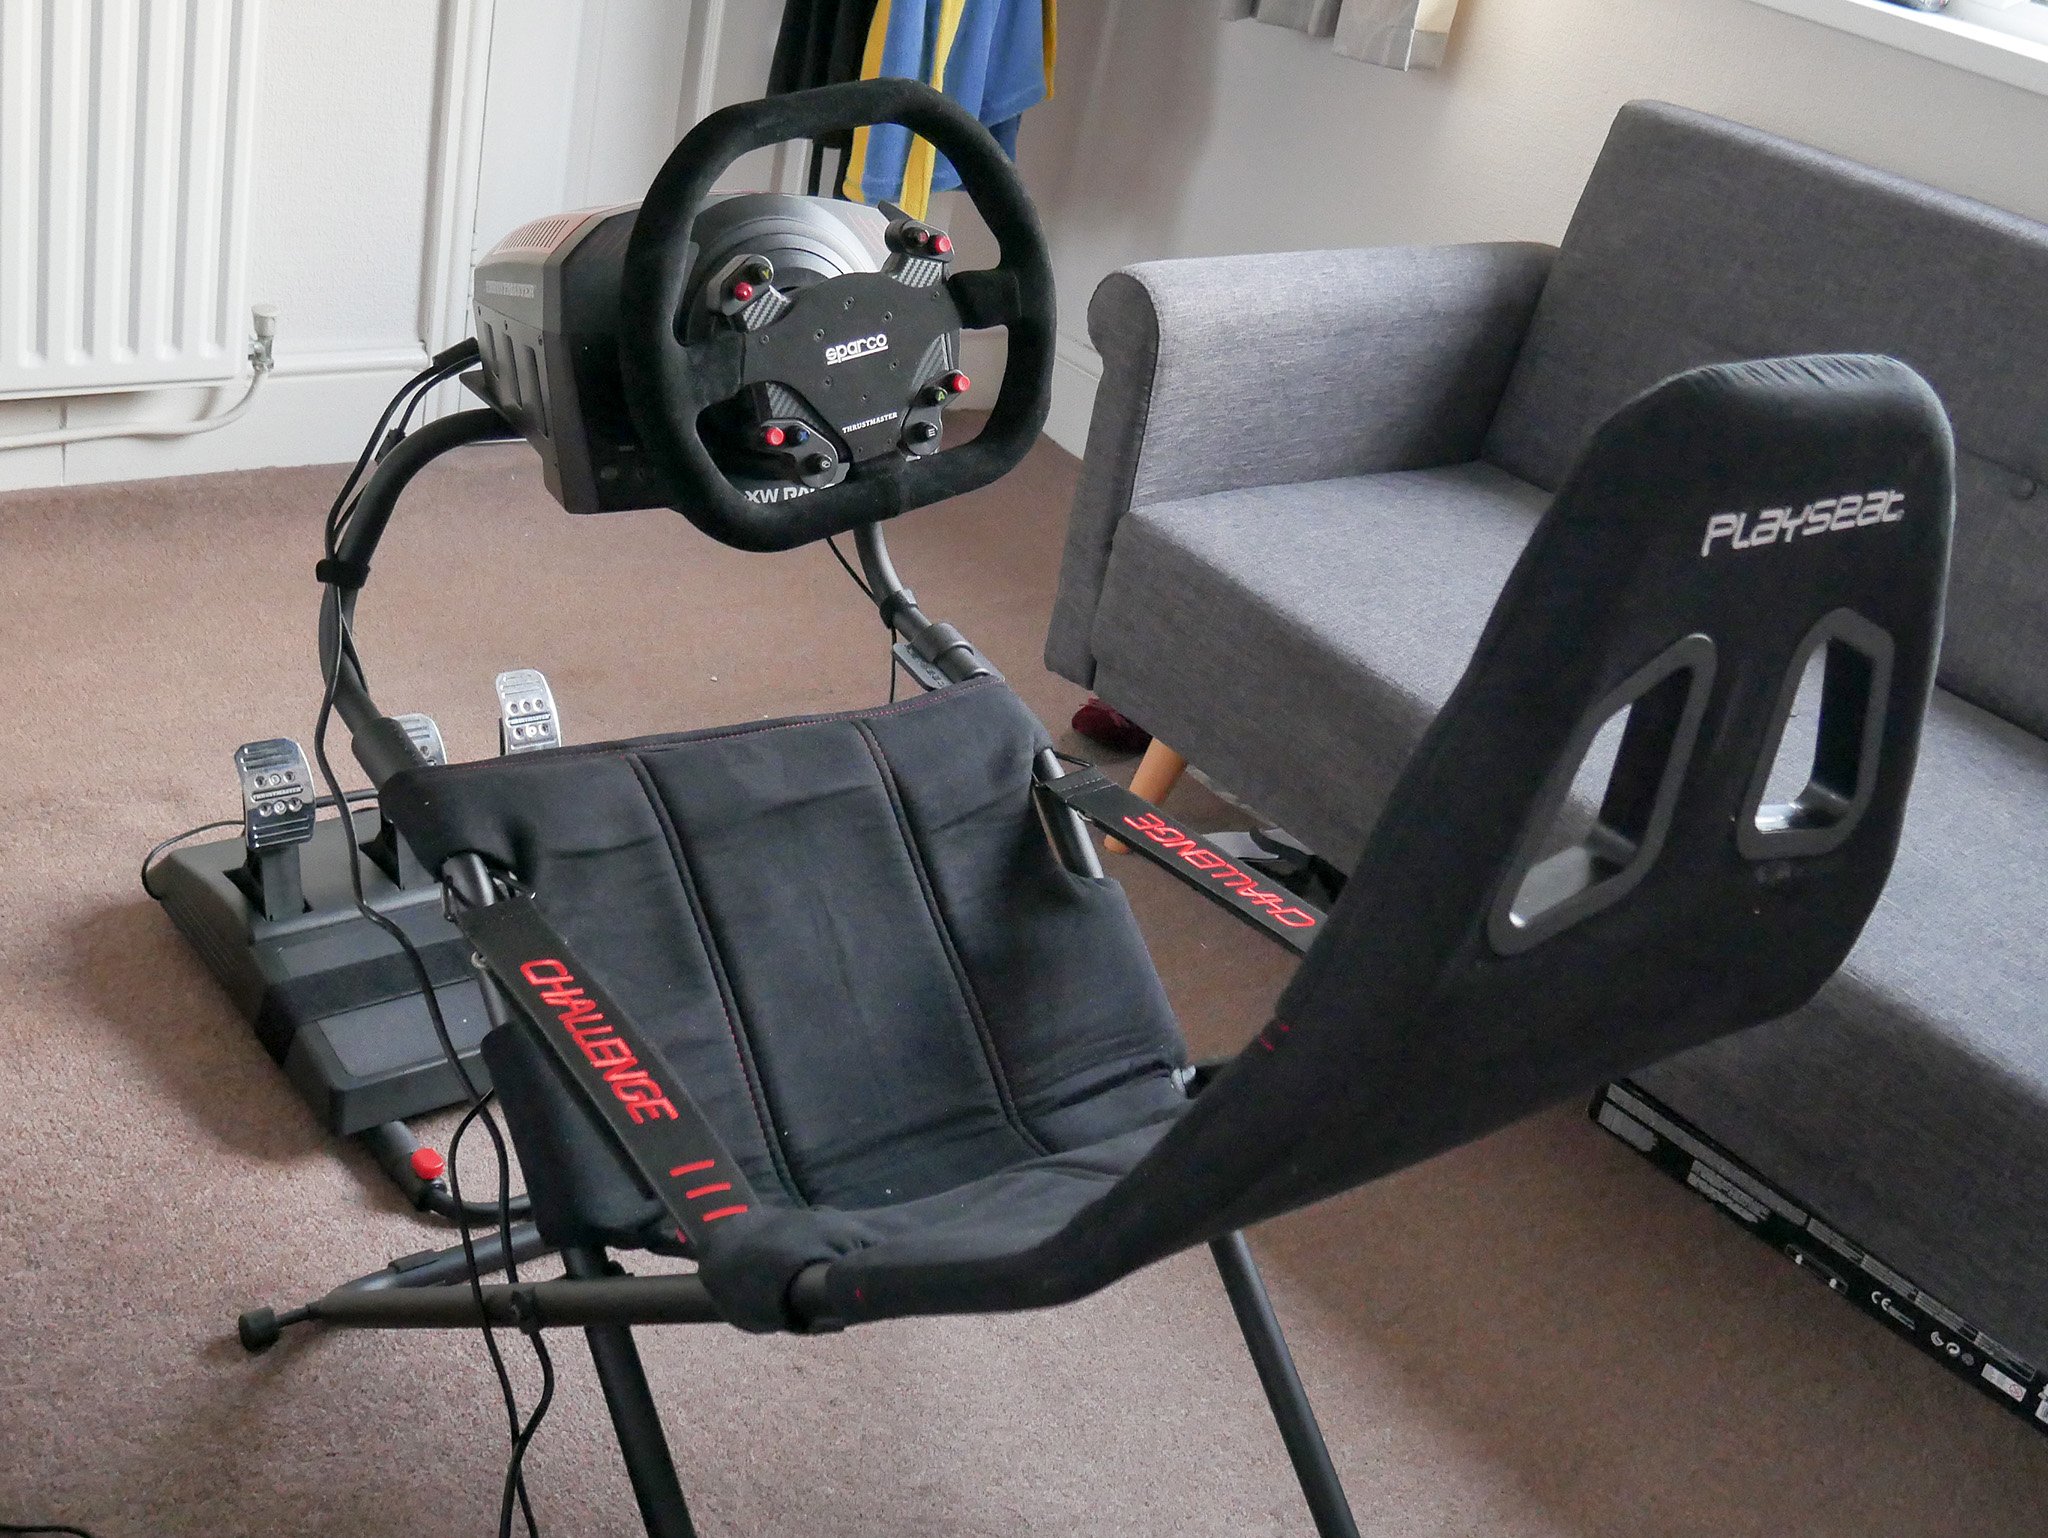 buitenspiegel essence vermogen How to build an excellent Xbox One racing rig on a budget | Windows Central